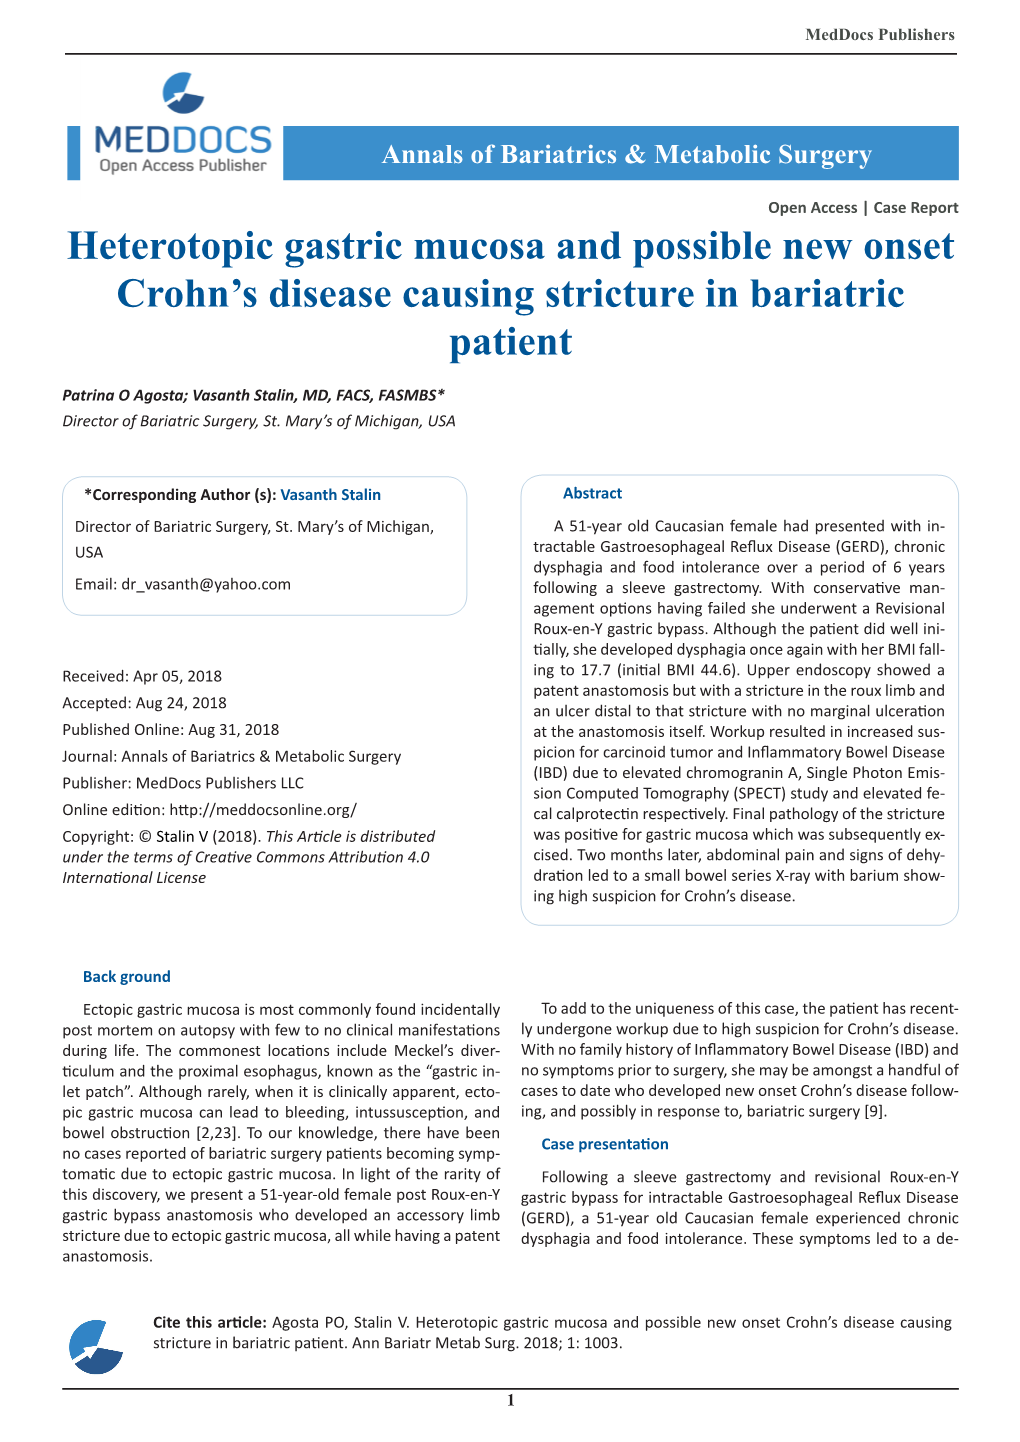 Heterotopic Gastric Mucosa and Possible New Onset Crohn's Disease